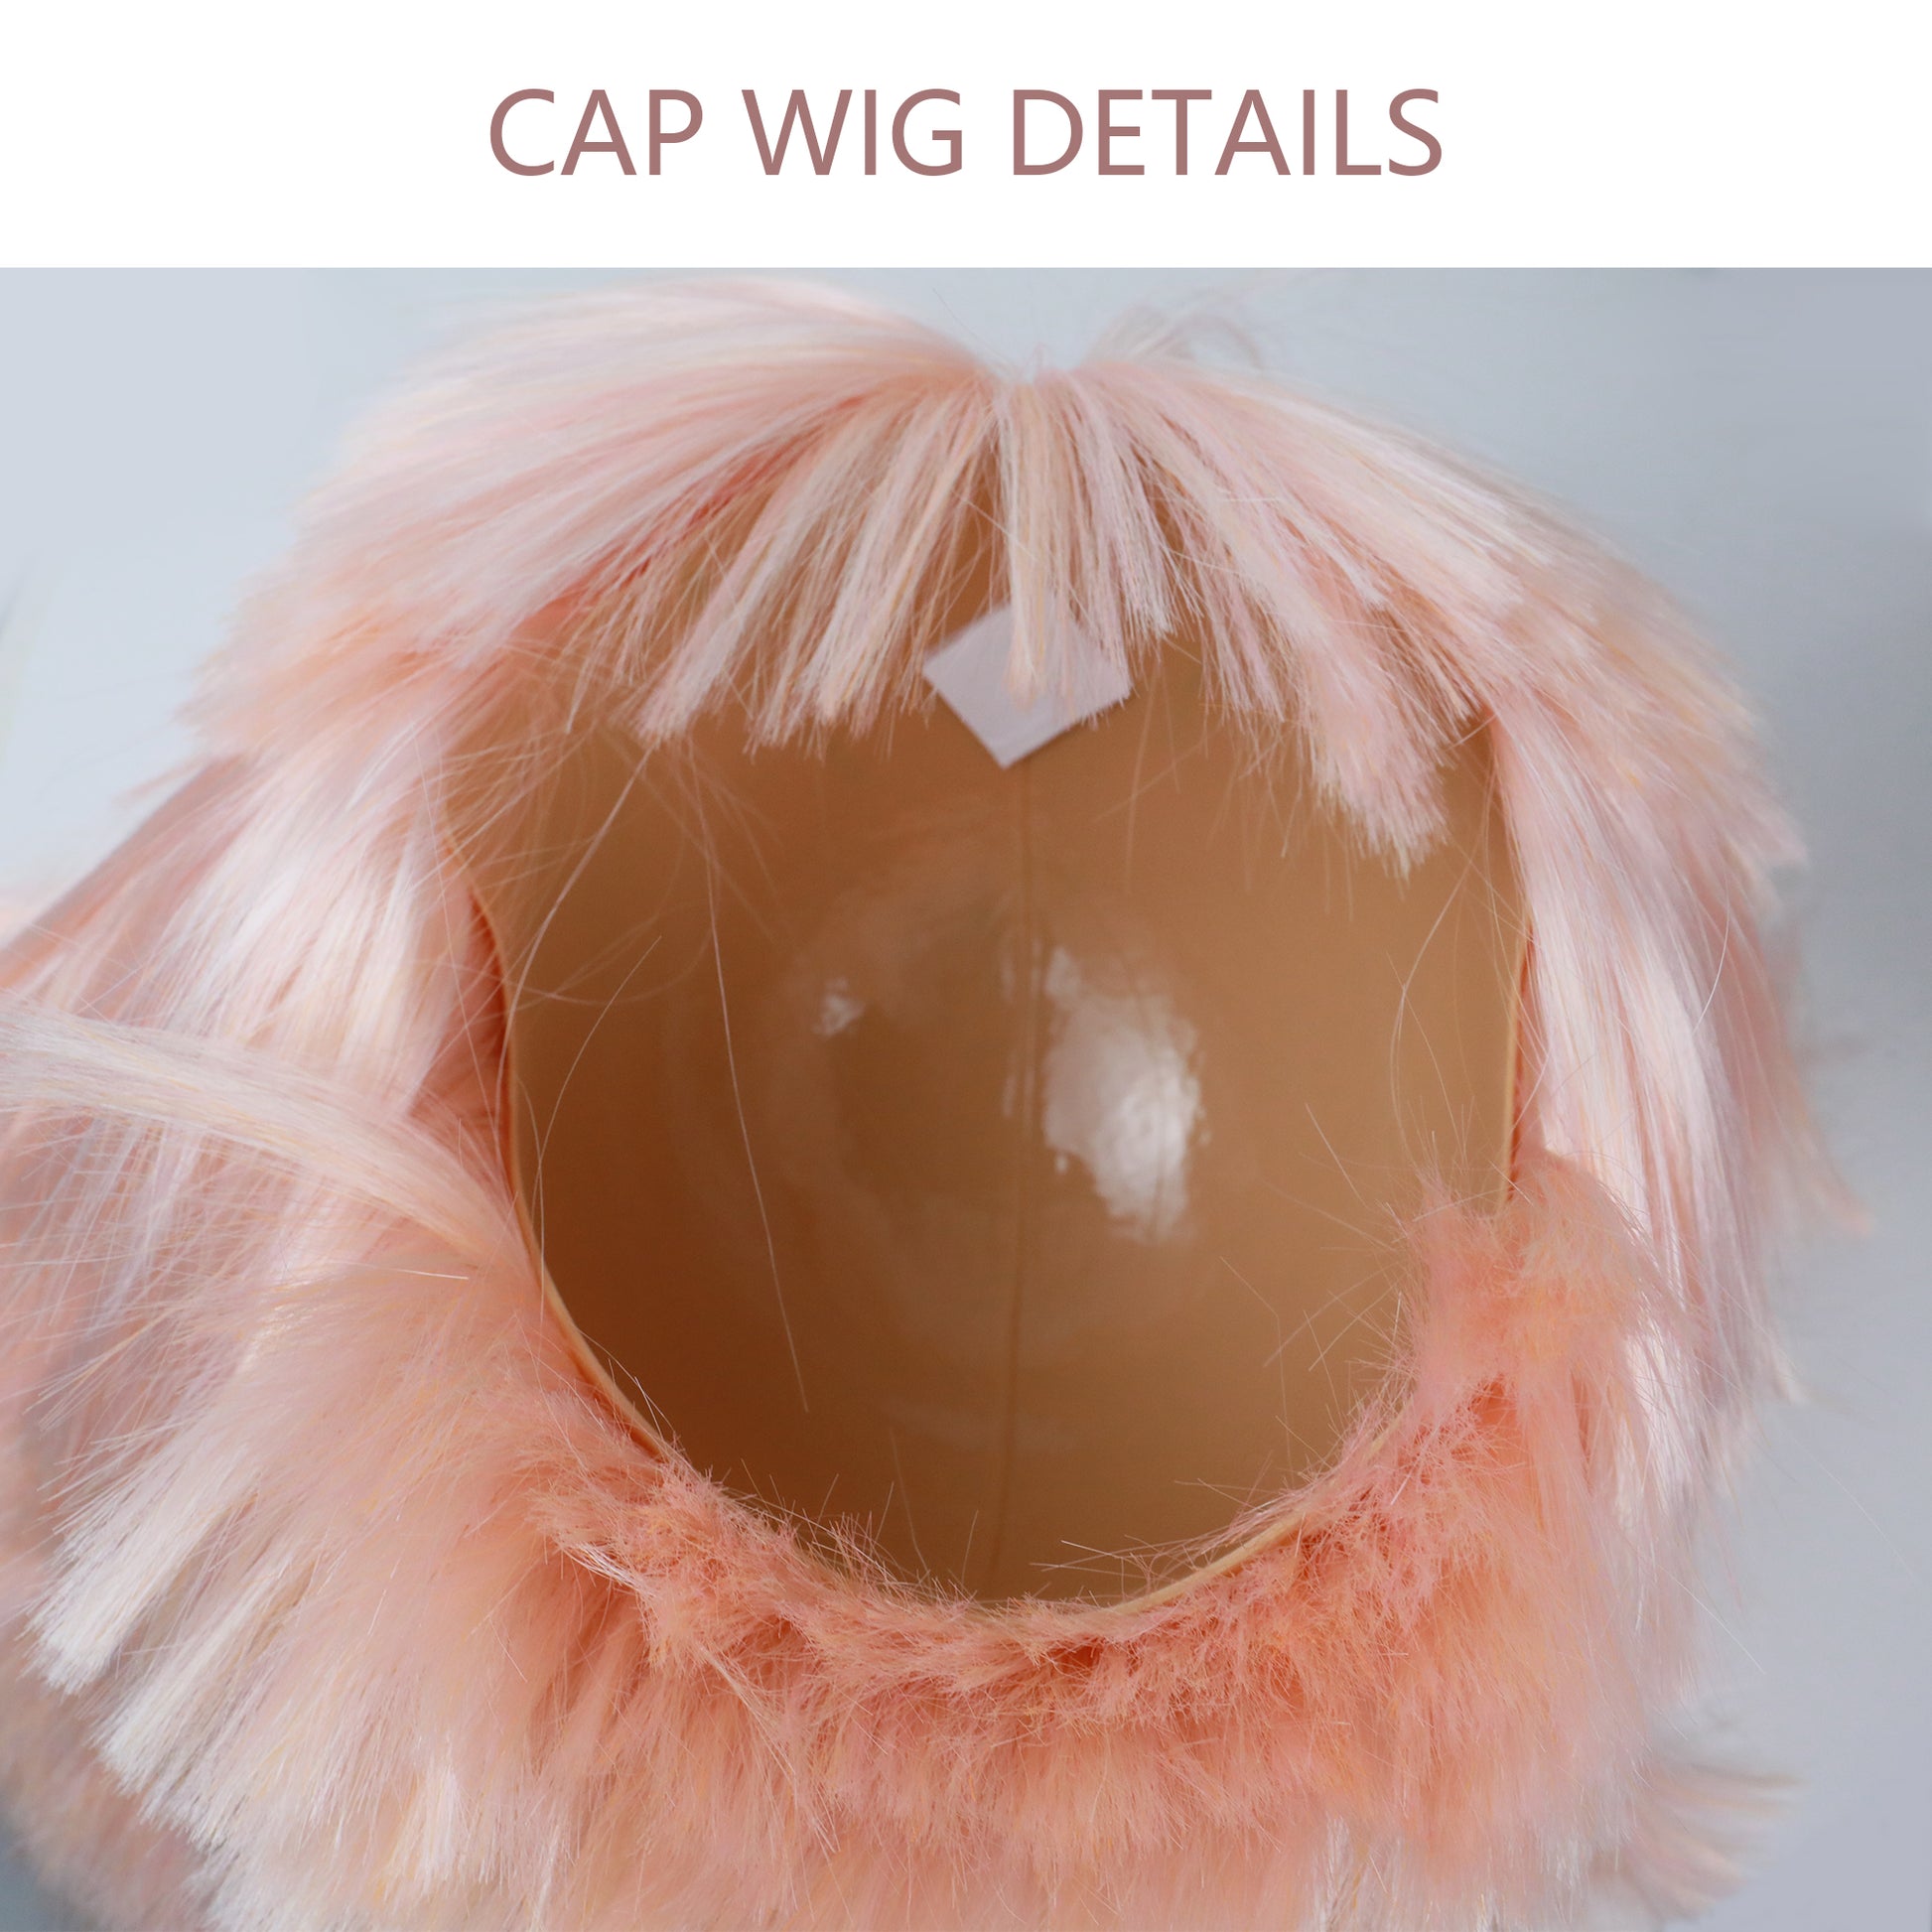 DE-LIANG Luxury Female BOBO Wigs, Candy-Colored Bangs Short Straight Hair,Women Hair for Clothing Store Mannequin Head Decoration,Dress Form Prop DE-LIANG